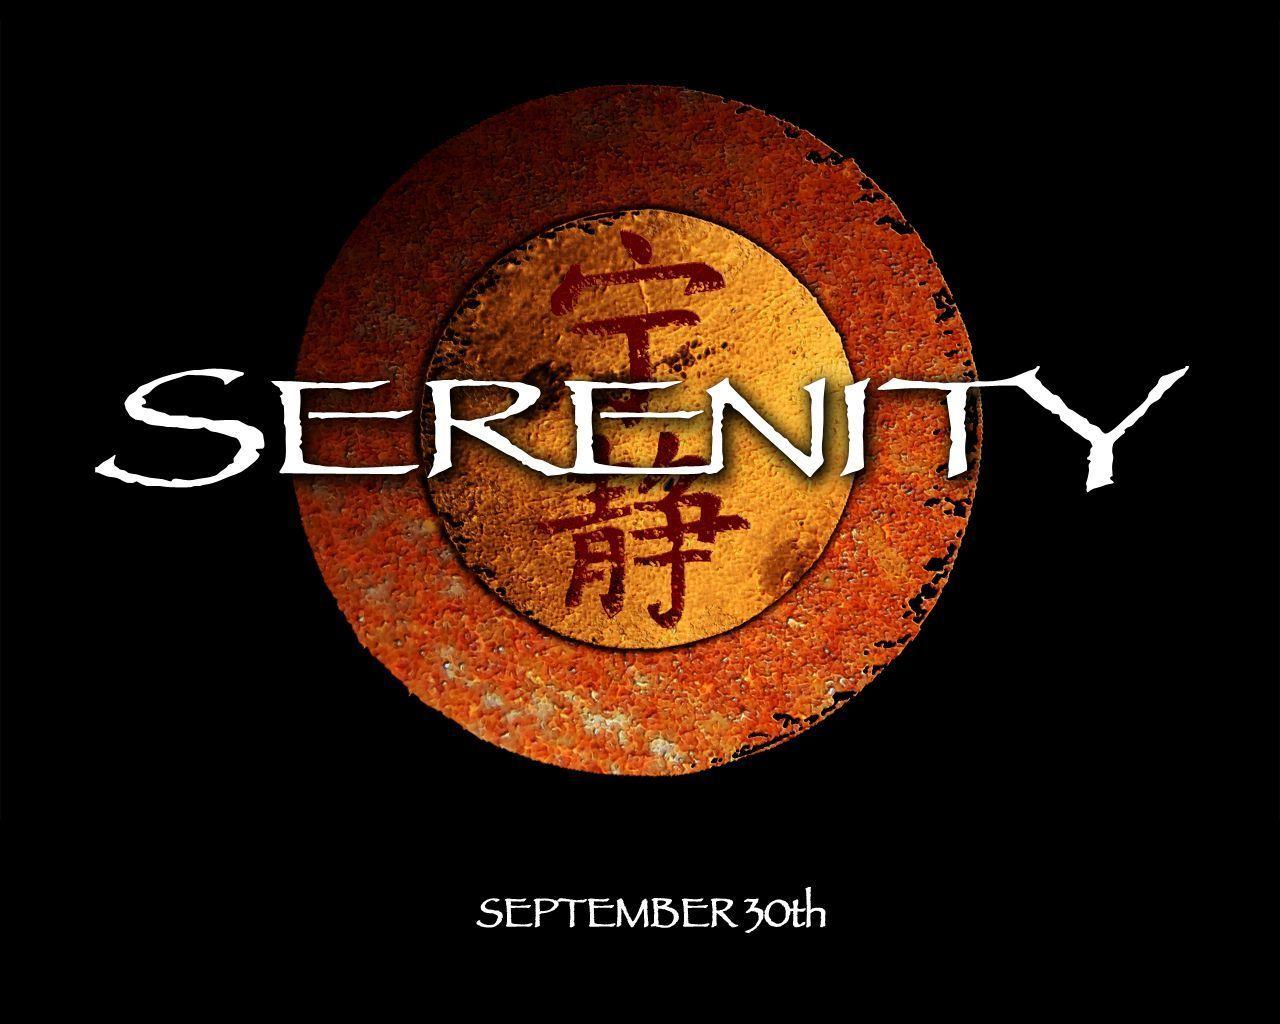 Serenity Wallpaper. Daily inspiration art photo, picture